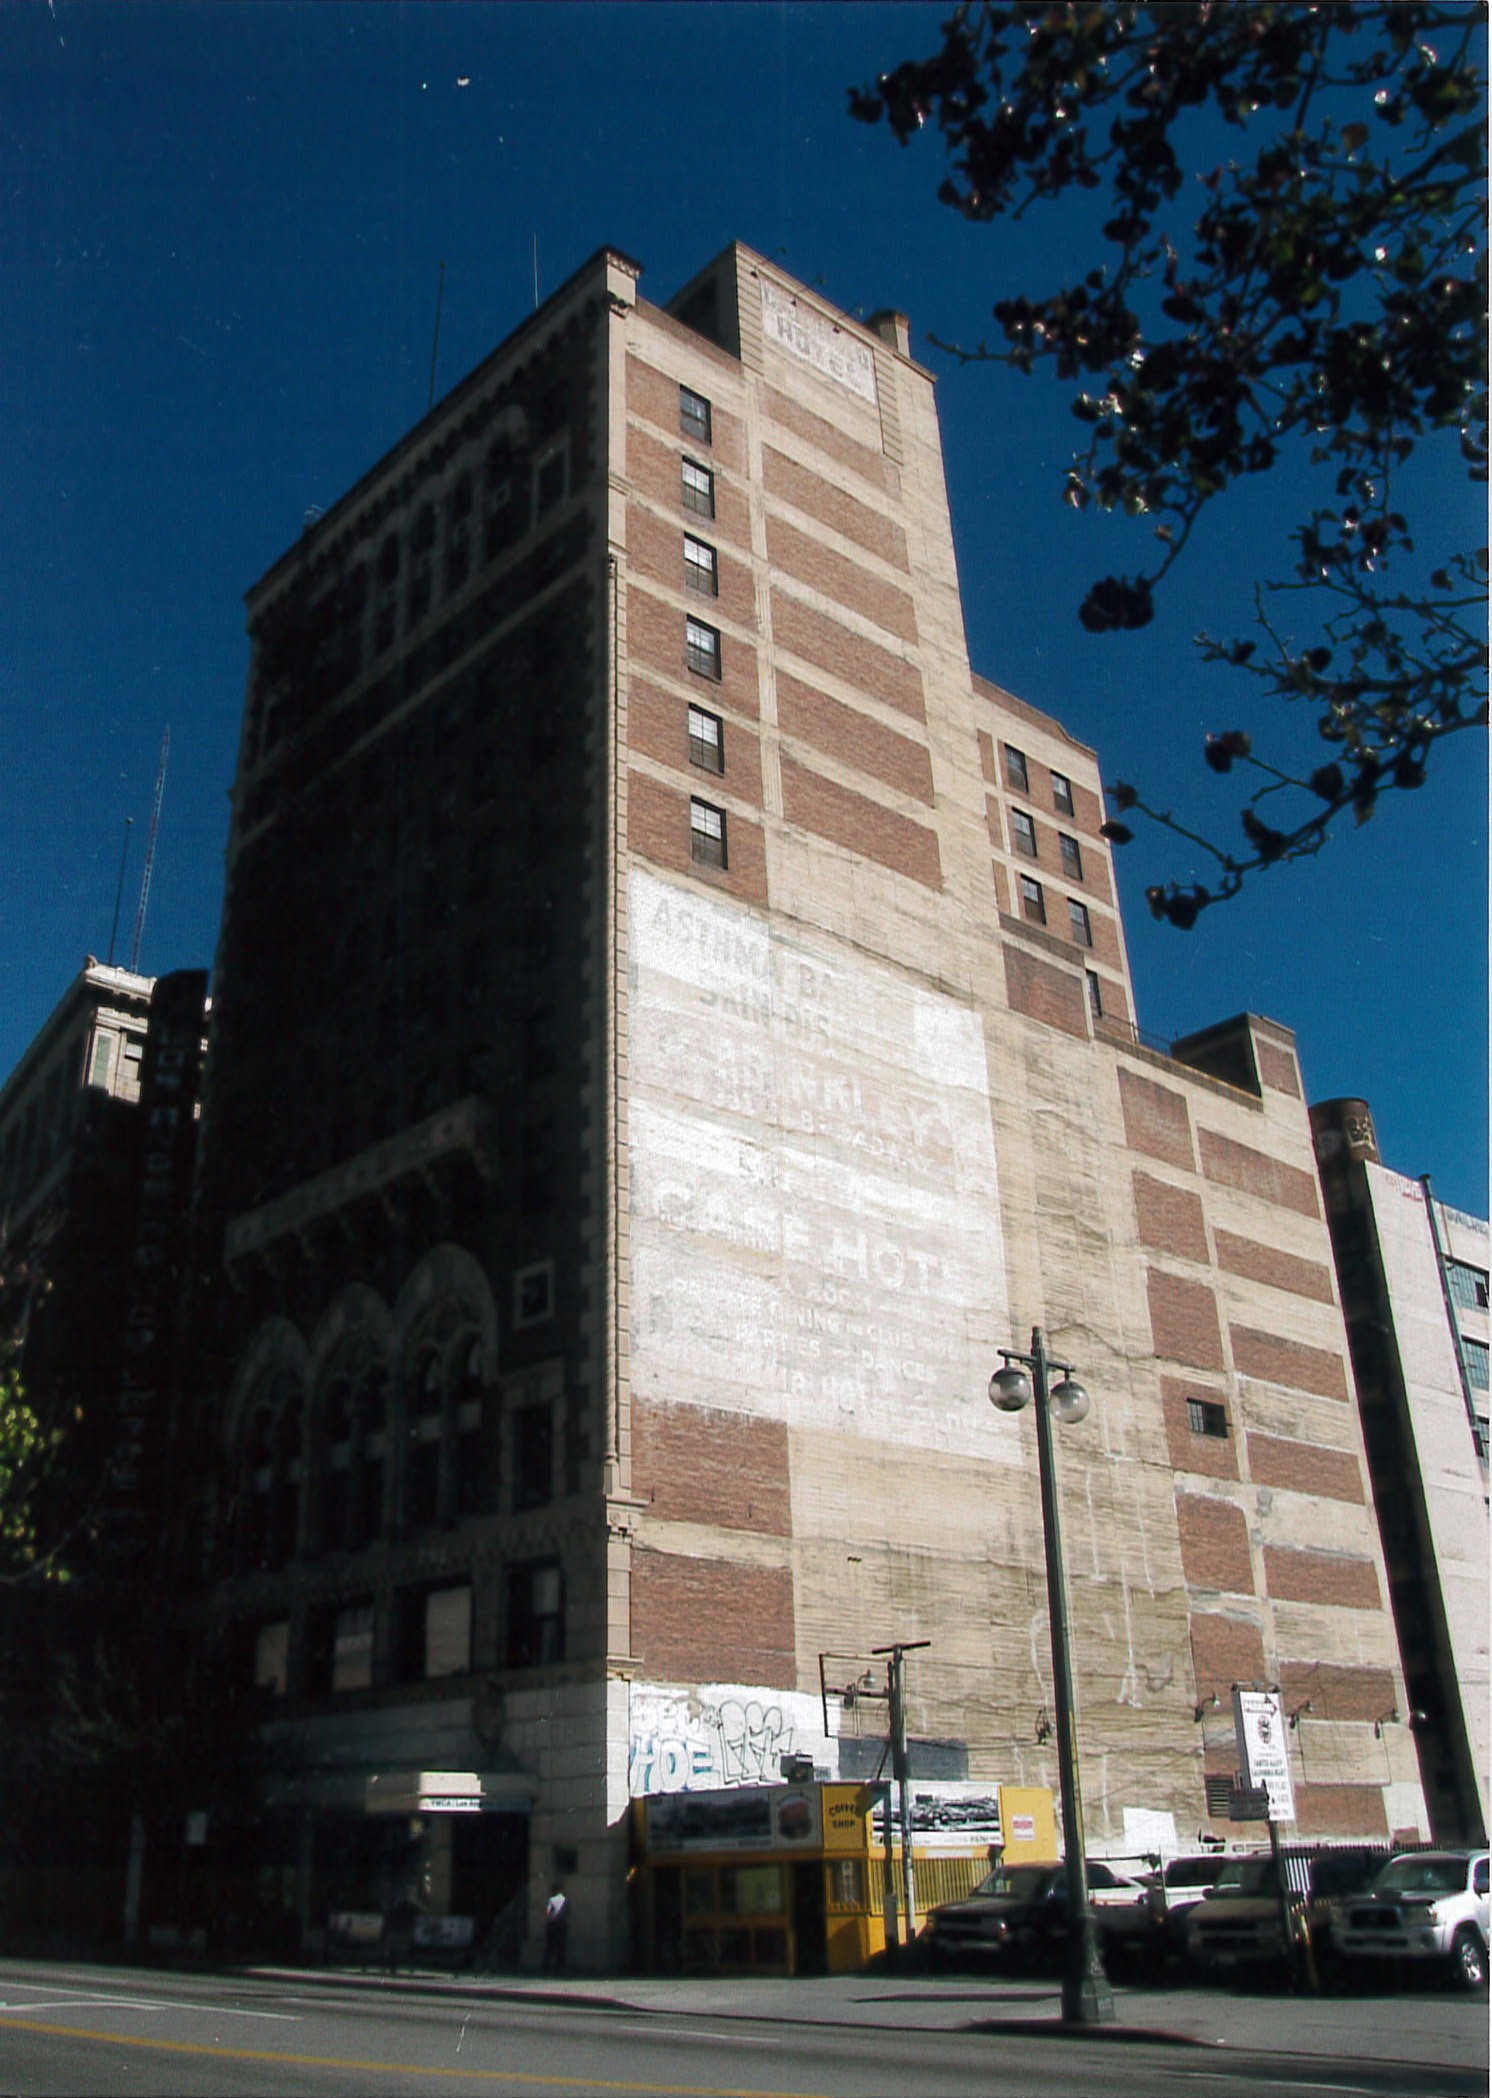 Side view of building from the street